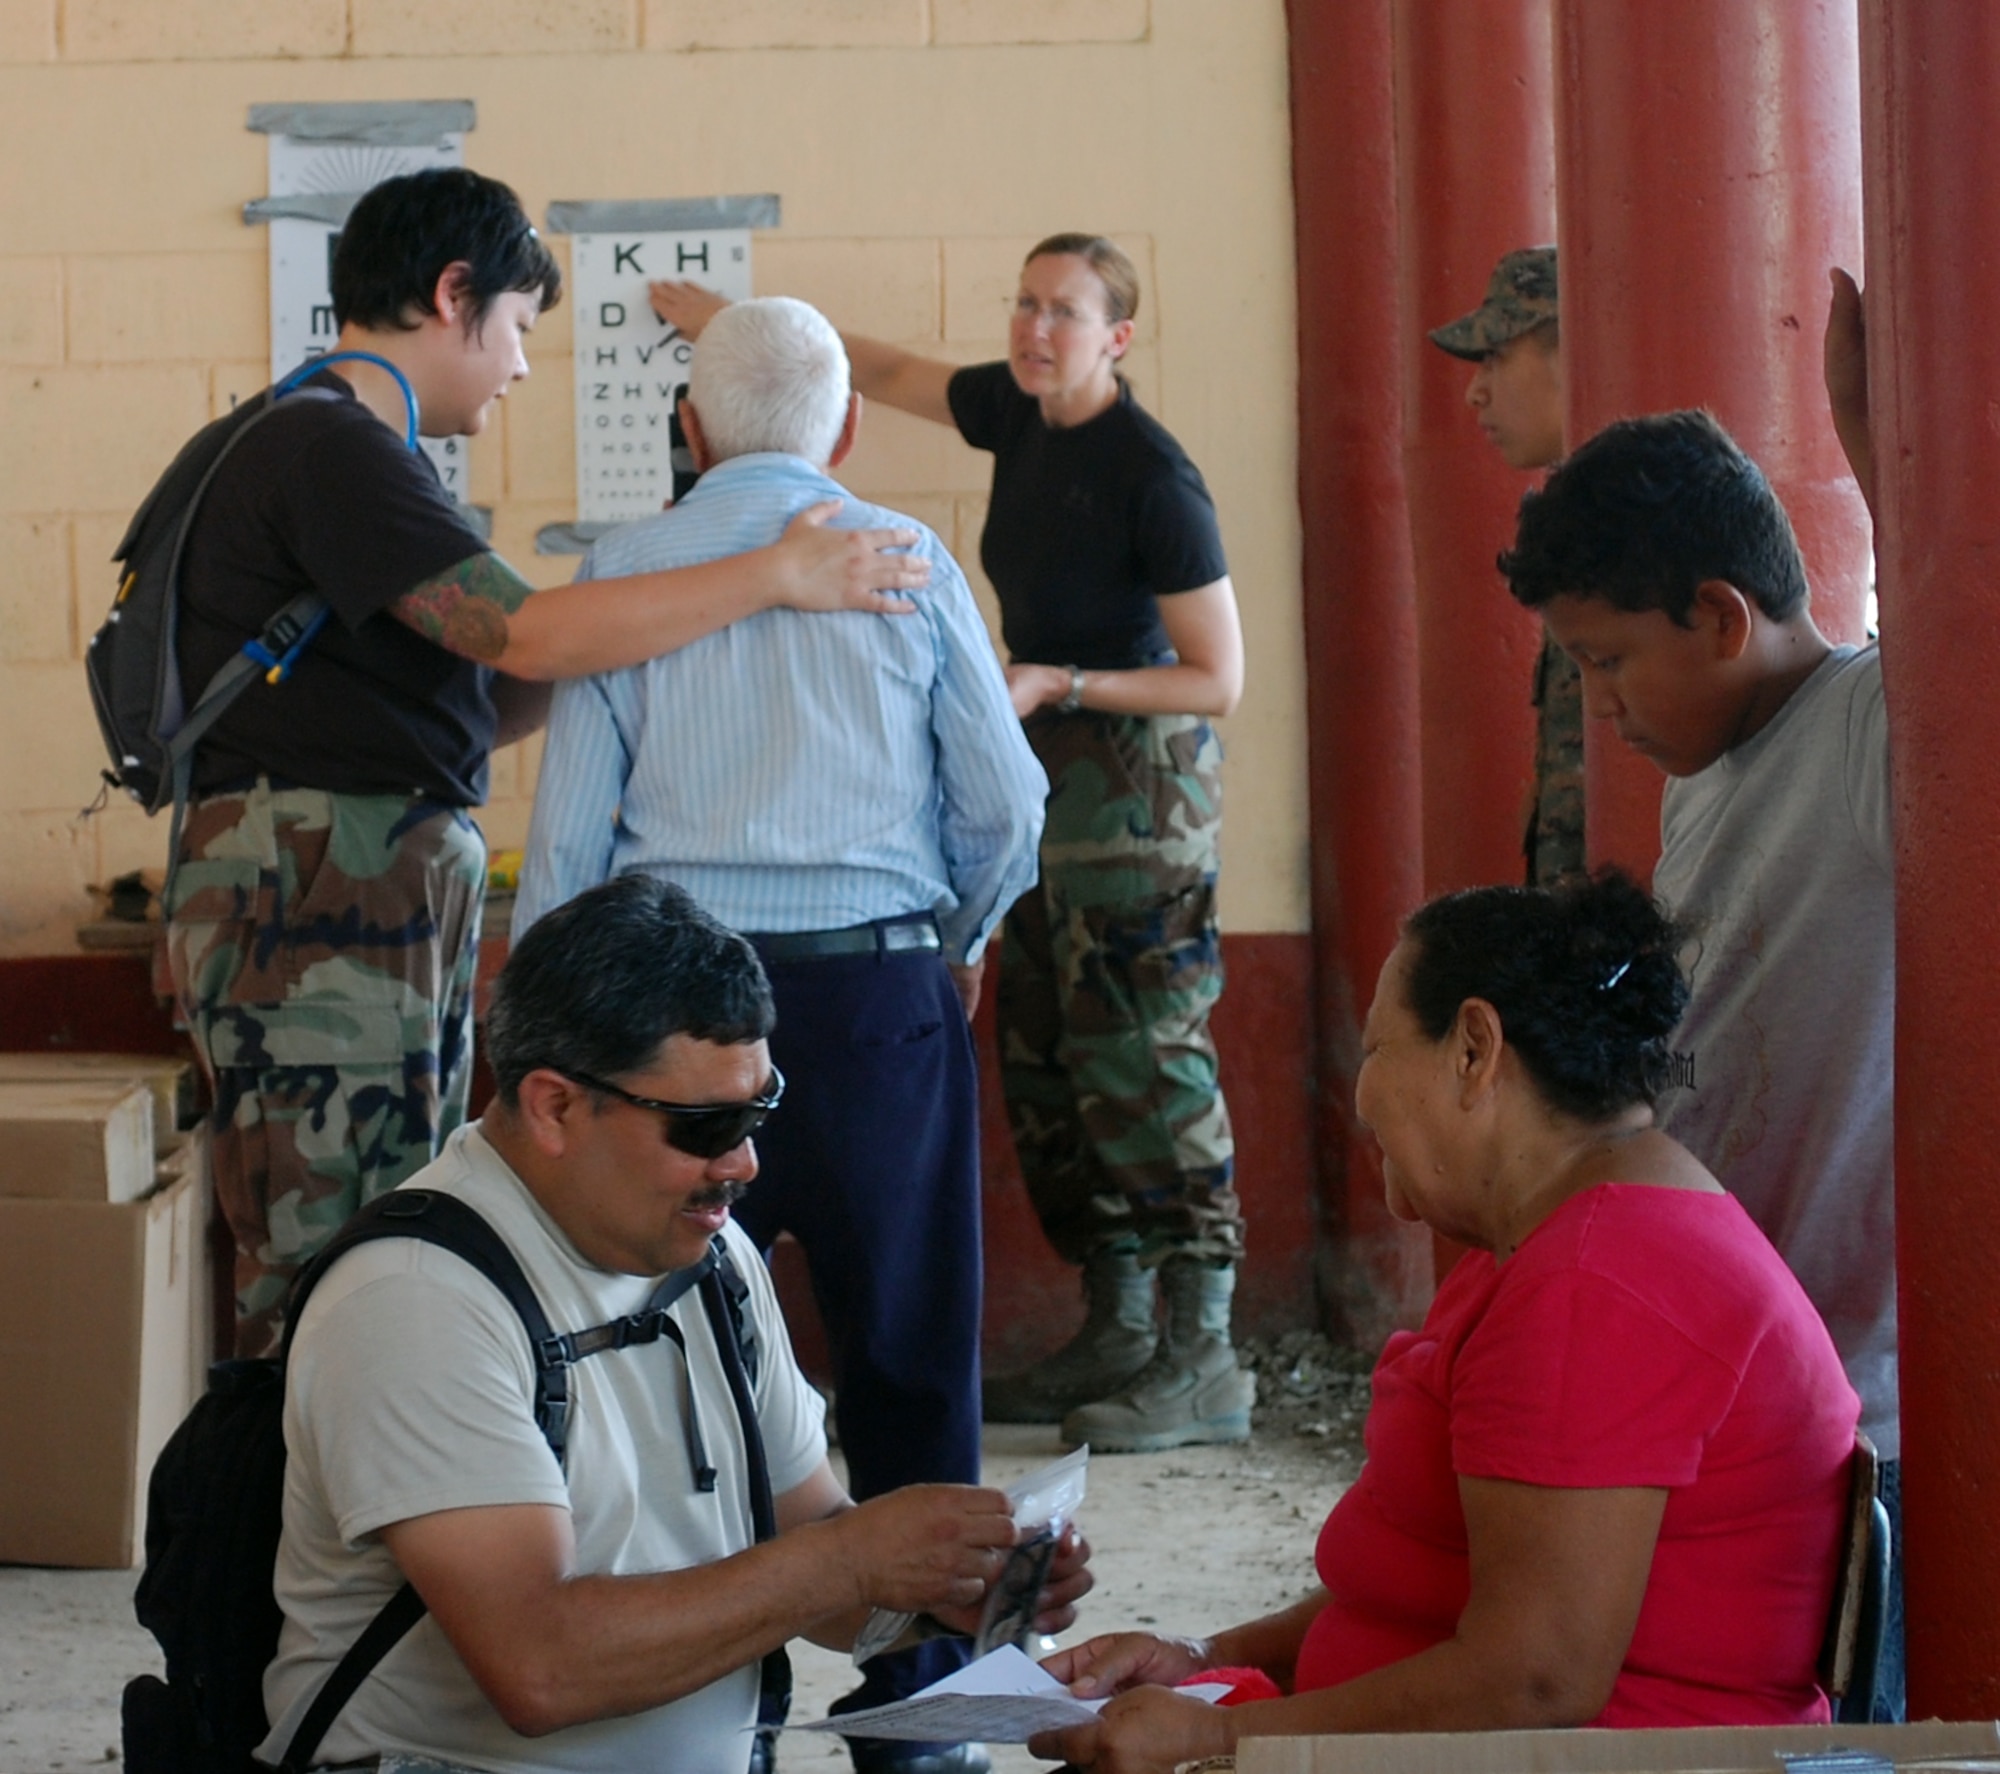 Members of the 173rd Medical Group examine multiple patients in Puerto Barrios, Guatemala during the Beyond Horizon's exercise April 12, 2010.  Twenty three personnel from the 173rd MDG deployed to Guatemala in support of this exercise which is designed to bring basic medical, dental and optical care to communities in need.   (U.S. Air Force Photo by Unknown)